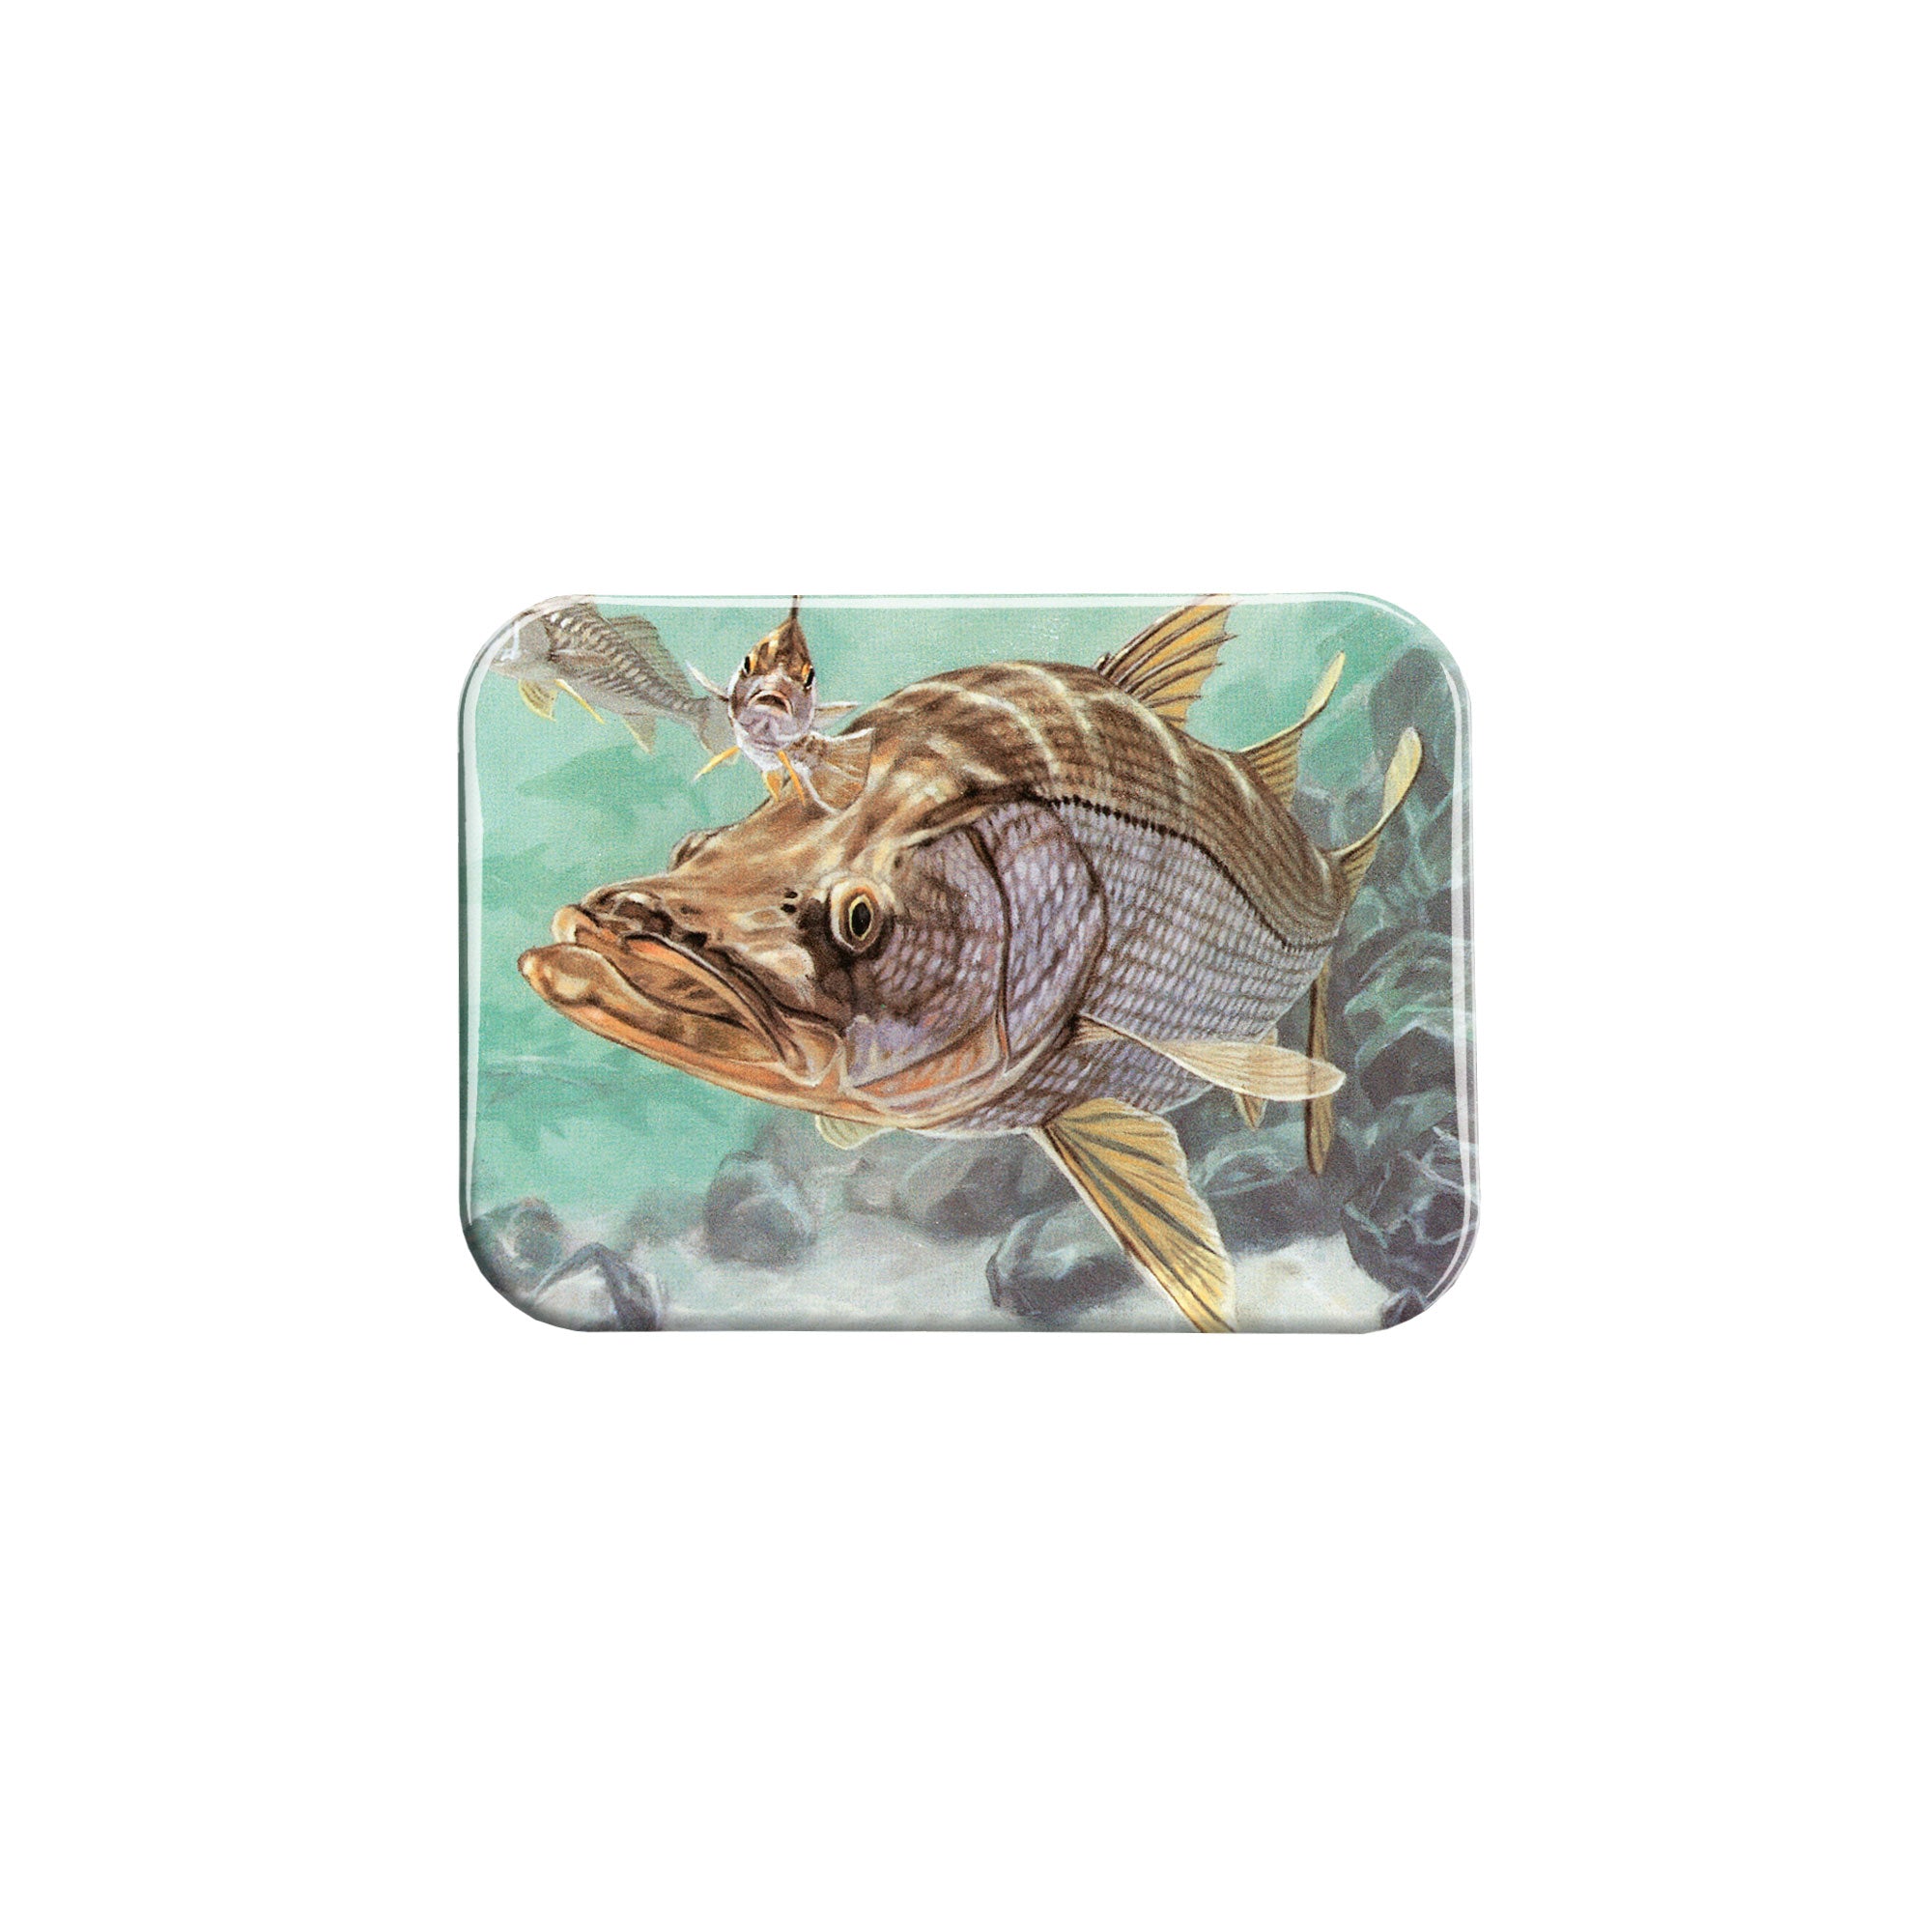 "Snook And Croakers" - 2.5" X 3.5" Rectangle Fridge Magnets